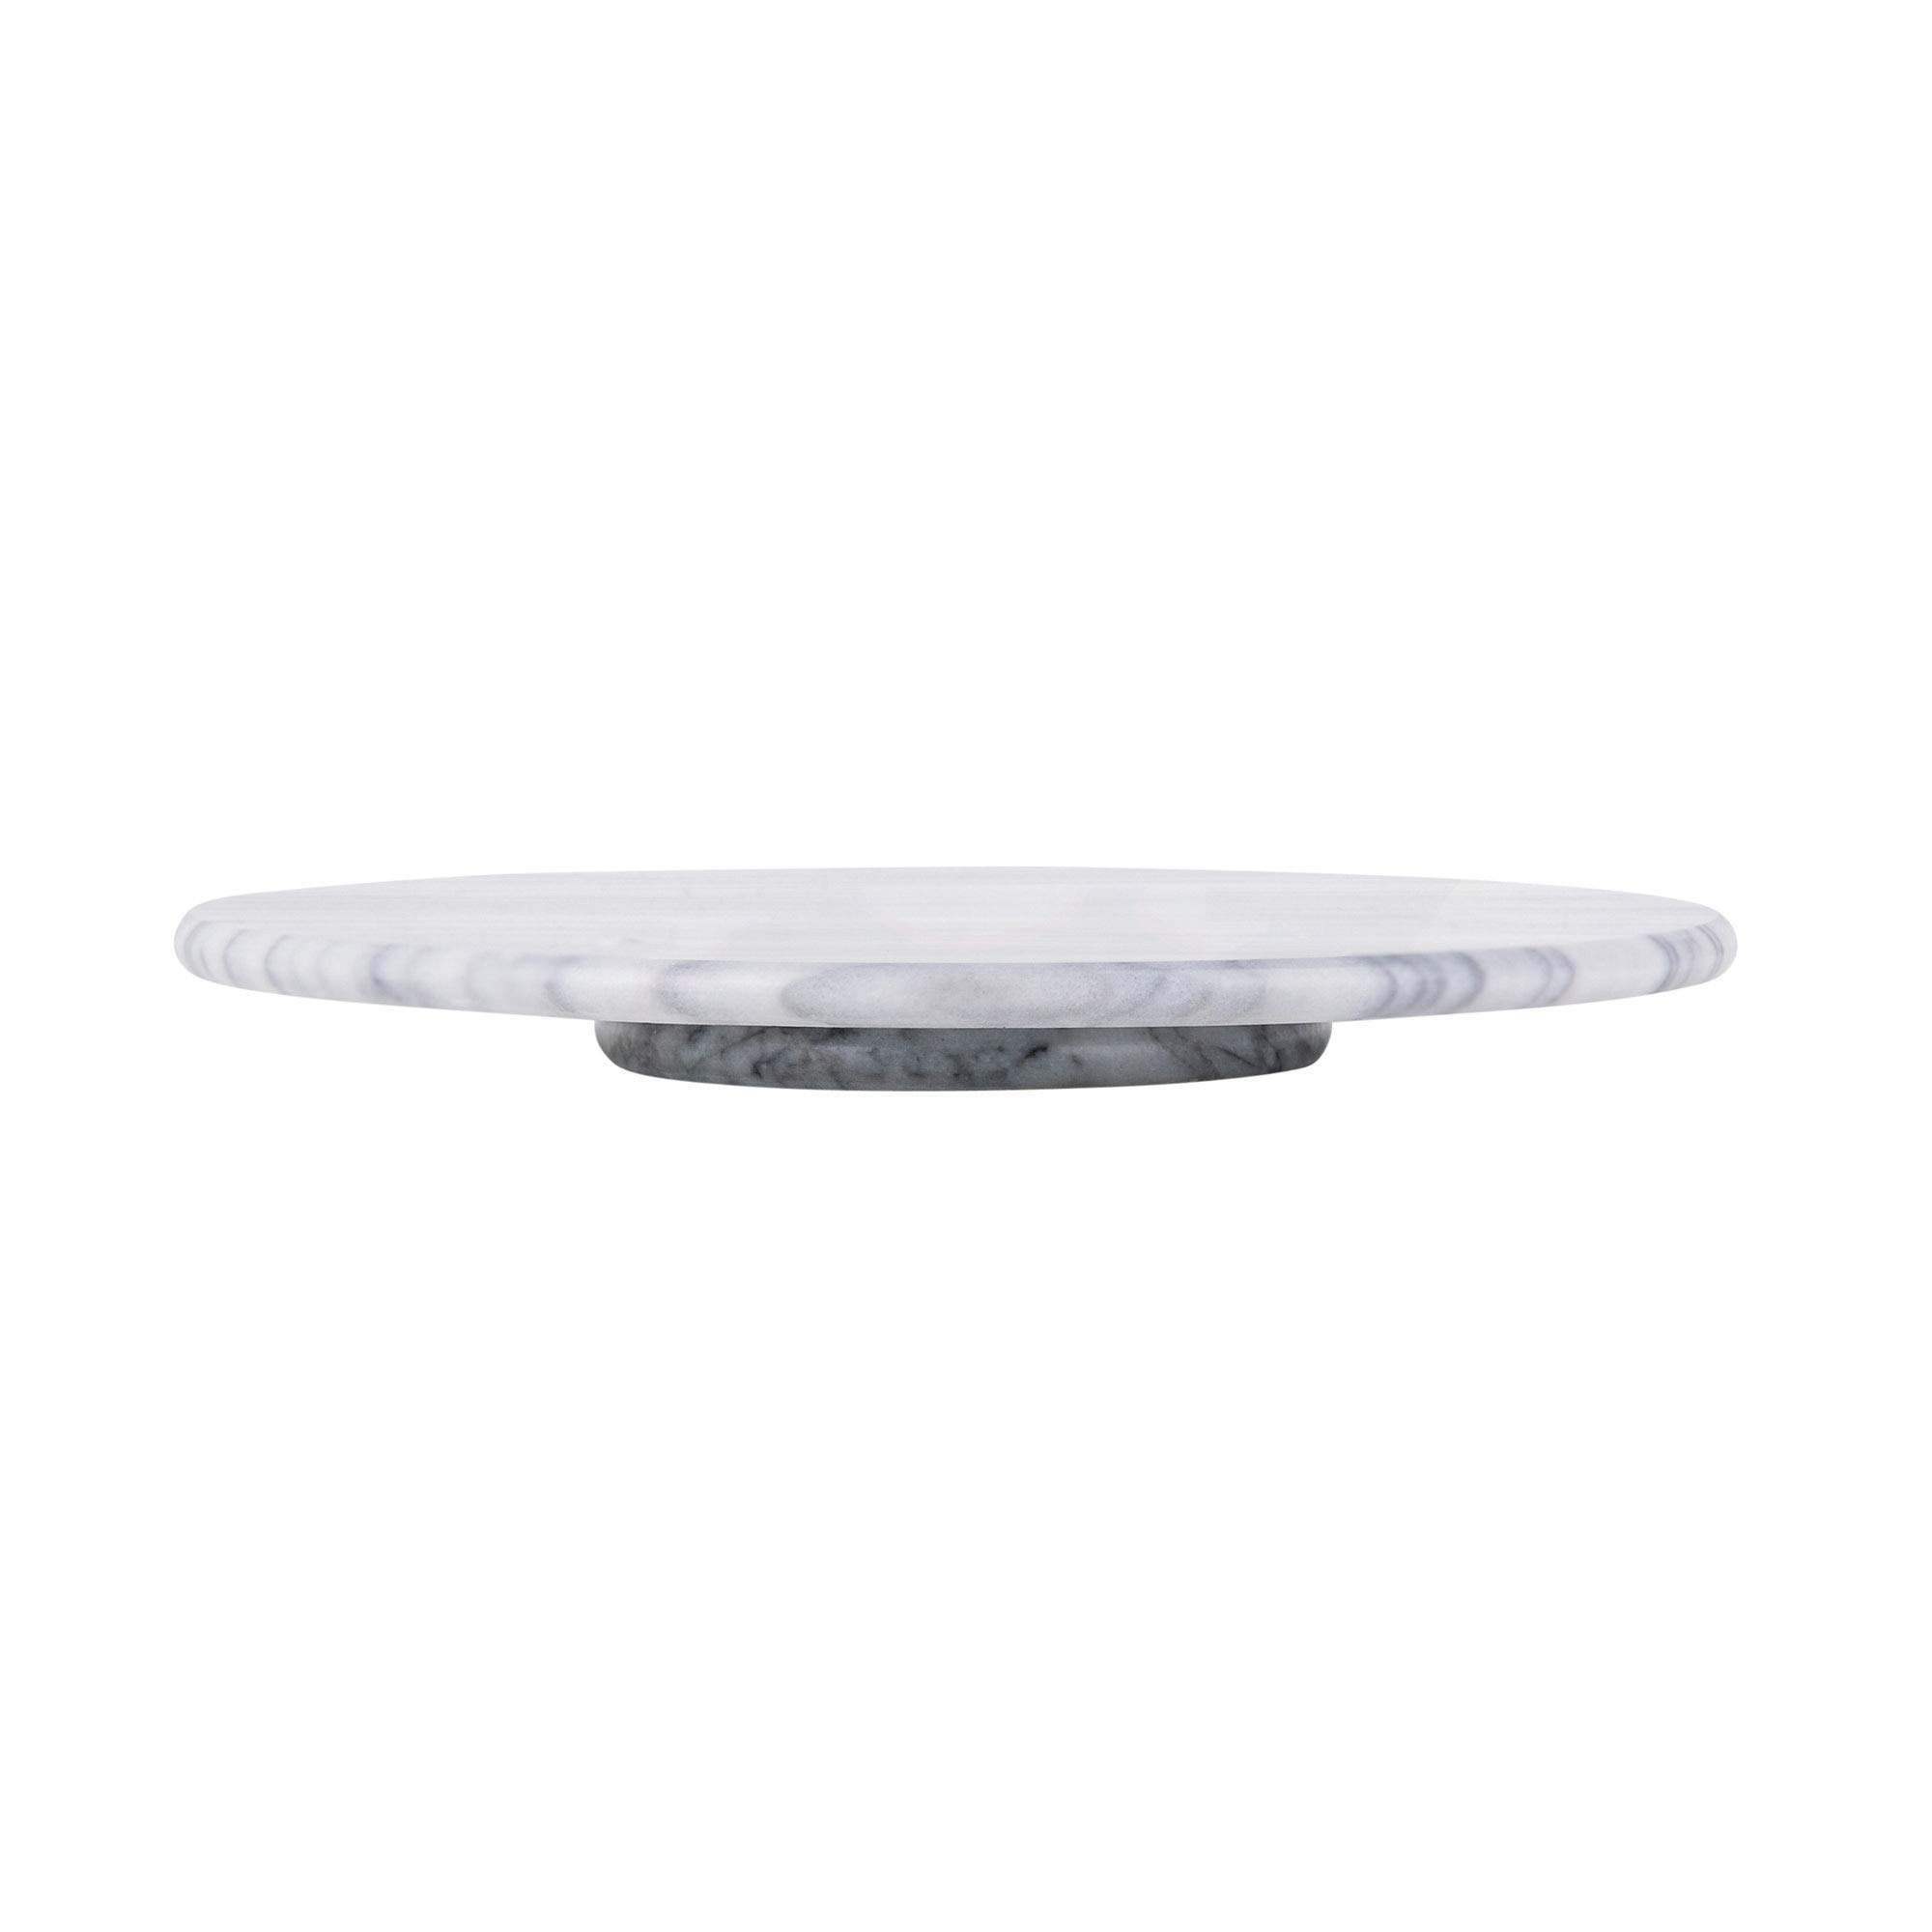 White Marble Lazy Susan 12 Inch Kitchen Turntable - Spice Organizer for Countertops and Cabinets